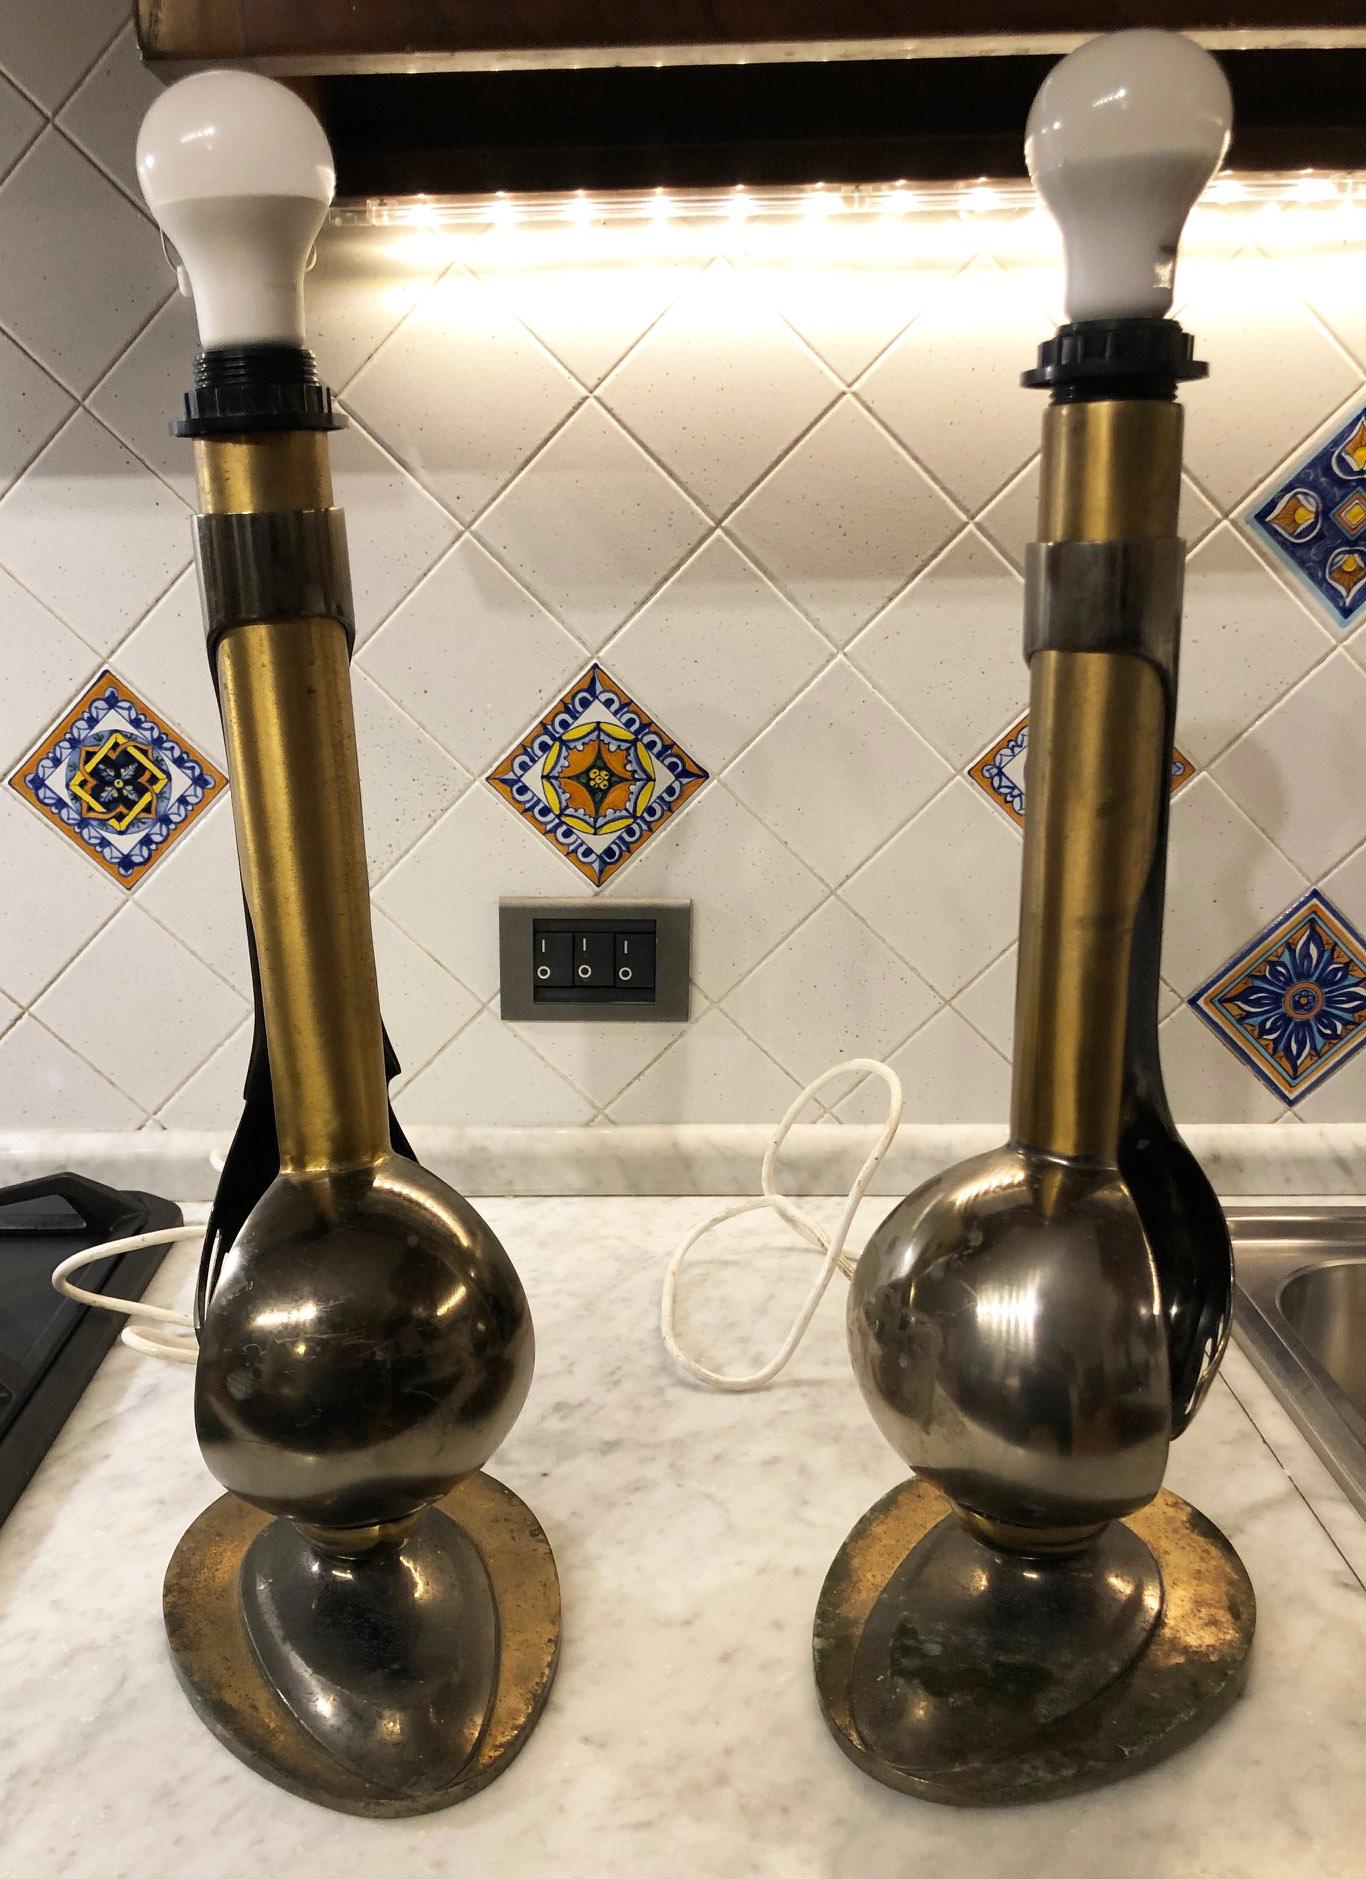 Pair of table lamps in brass and alloy, with a very particular Italian design, 1960s.
They show signs of oxidation.
They have no lampshade.
In working condition.
Equipped with original 20th century European wiring. 
We recommend buyer consults an